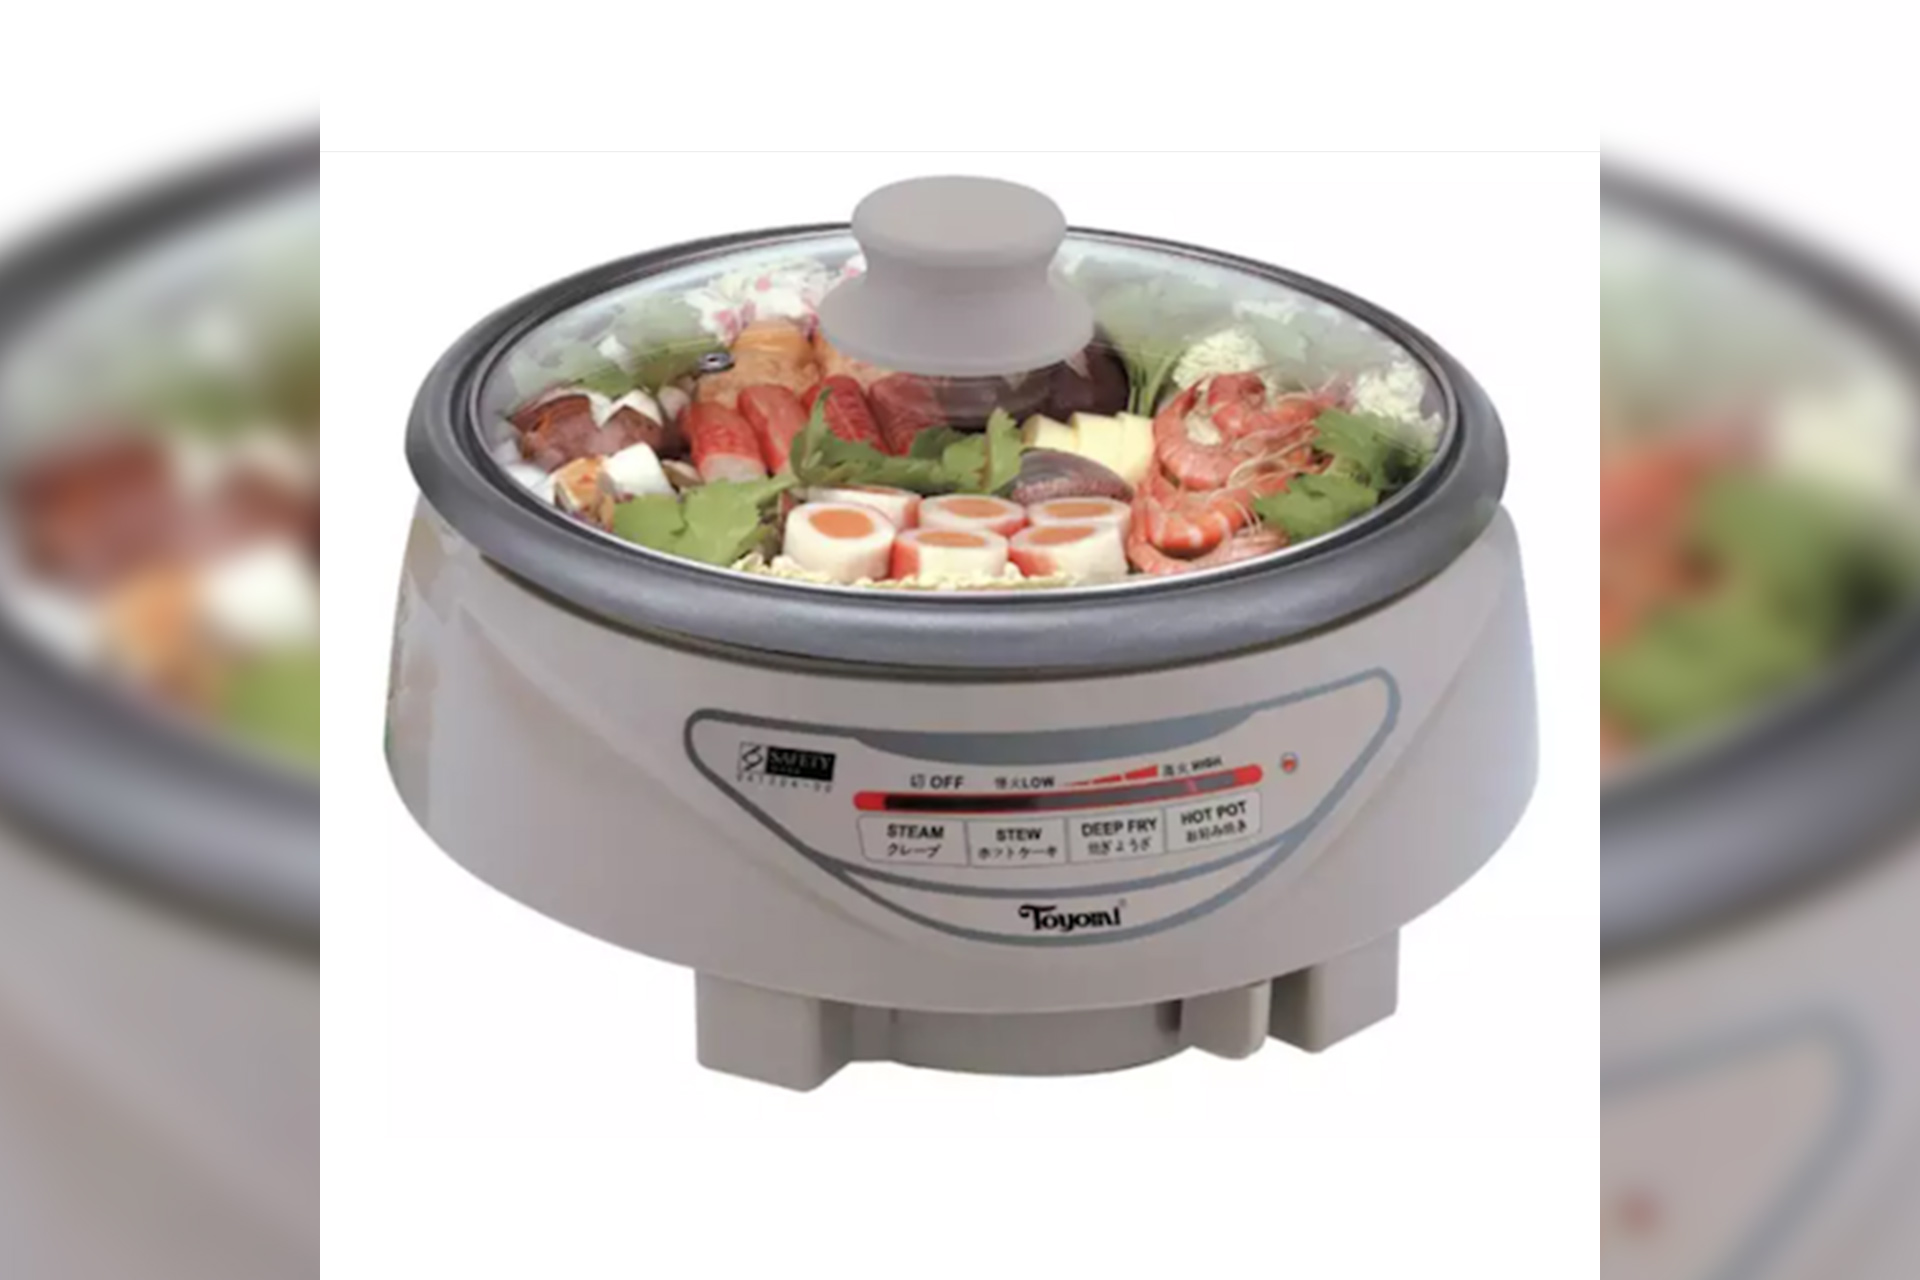 afnlazadaproducttoyomimulticooker-1592294159868833883918.jpg